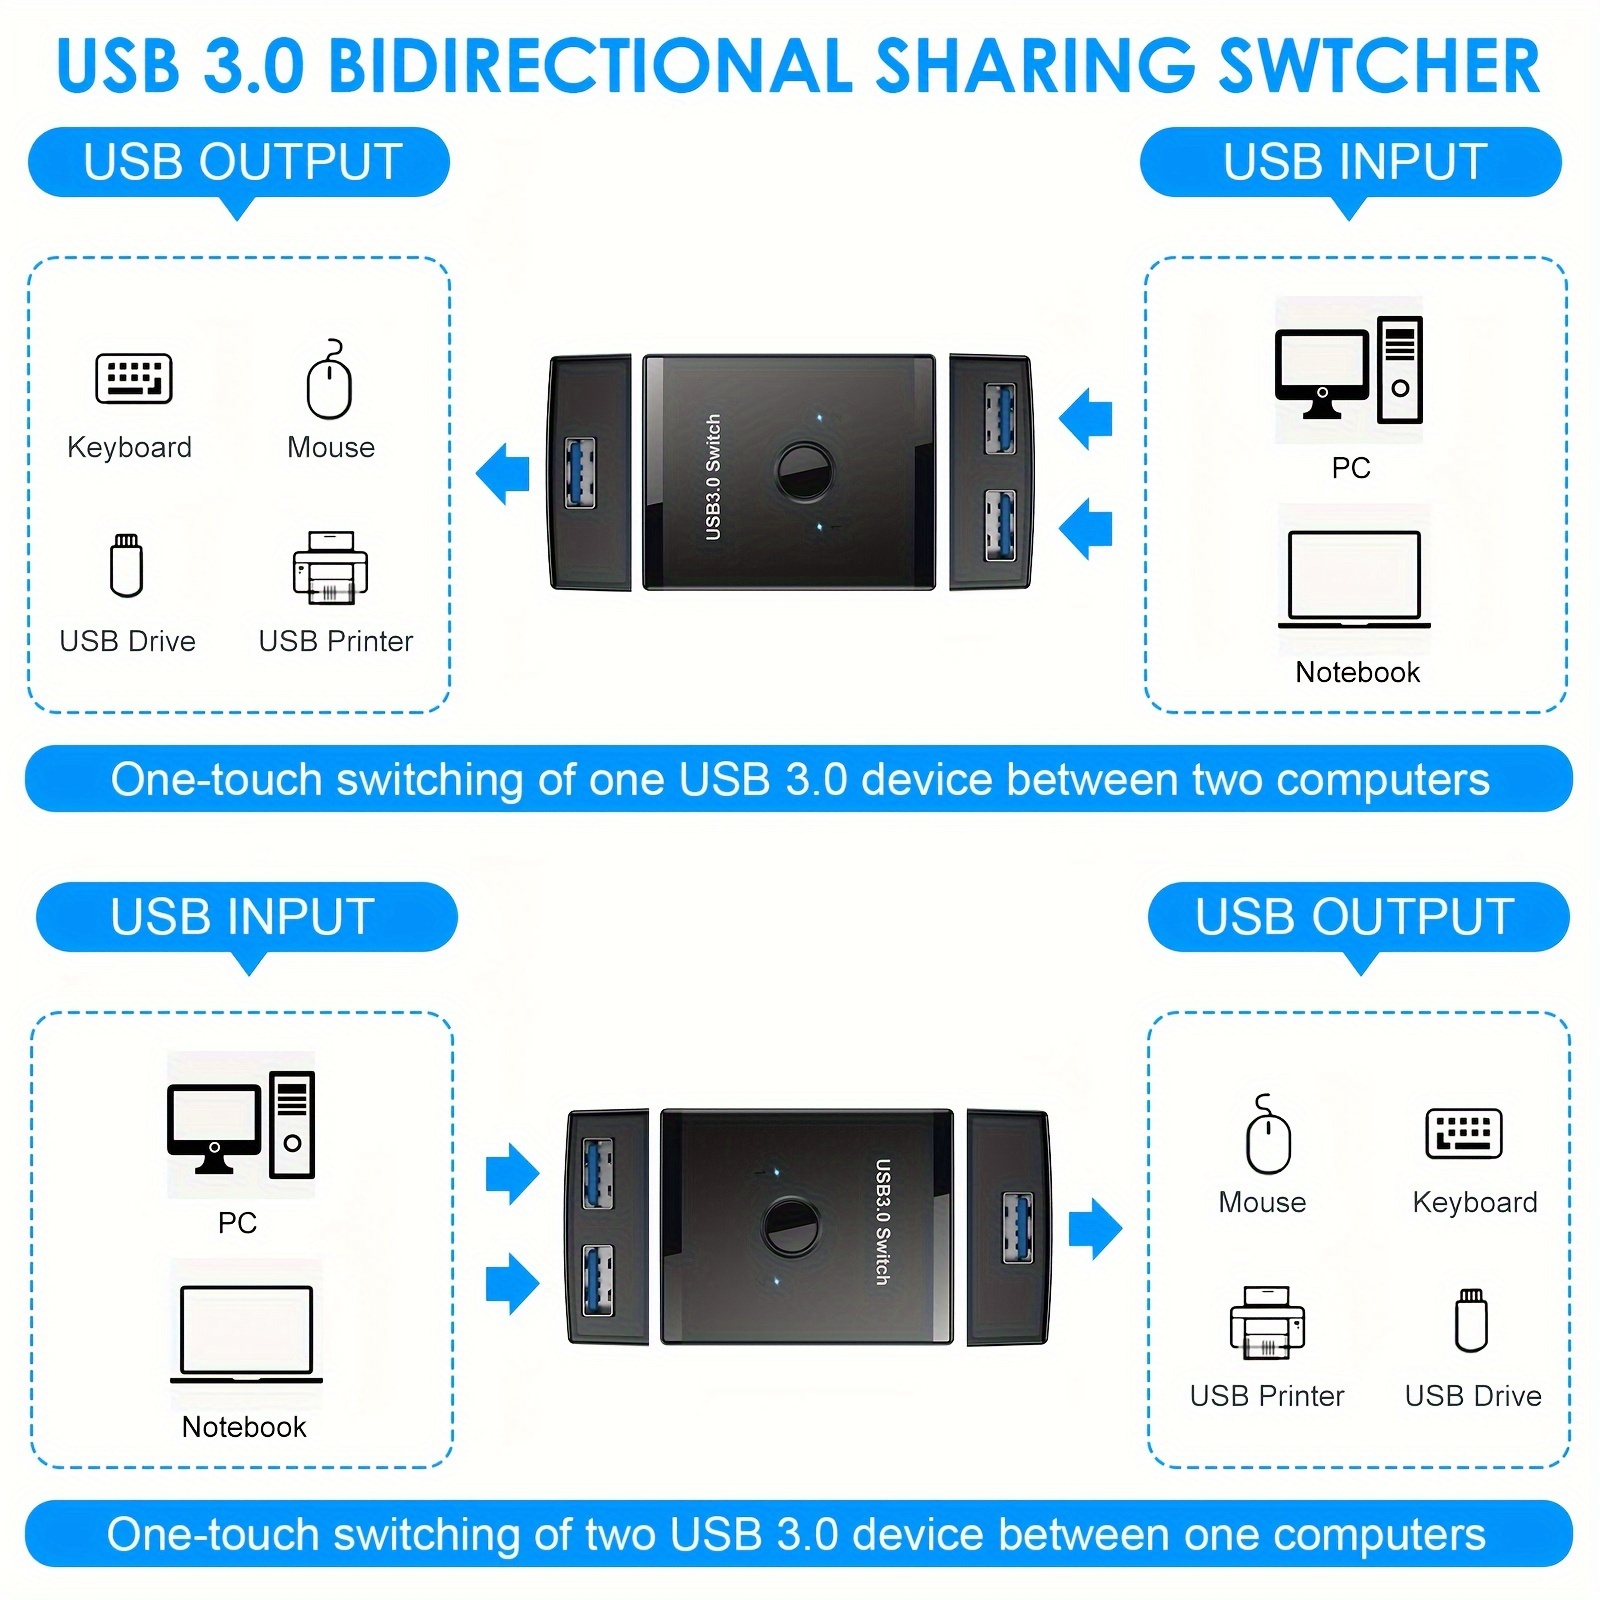 USB 3.0 Switch, Bi-Directional USB 3.0 Switch Selector, 2 in 1 Out / 1 in 2